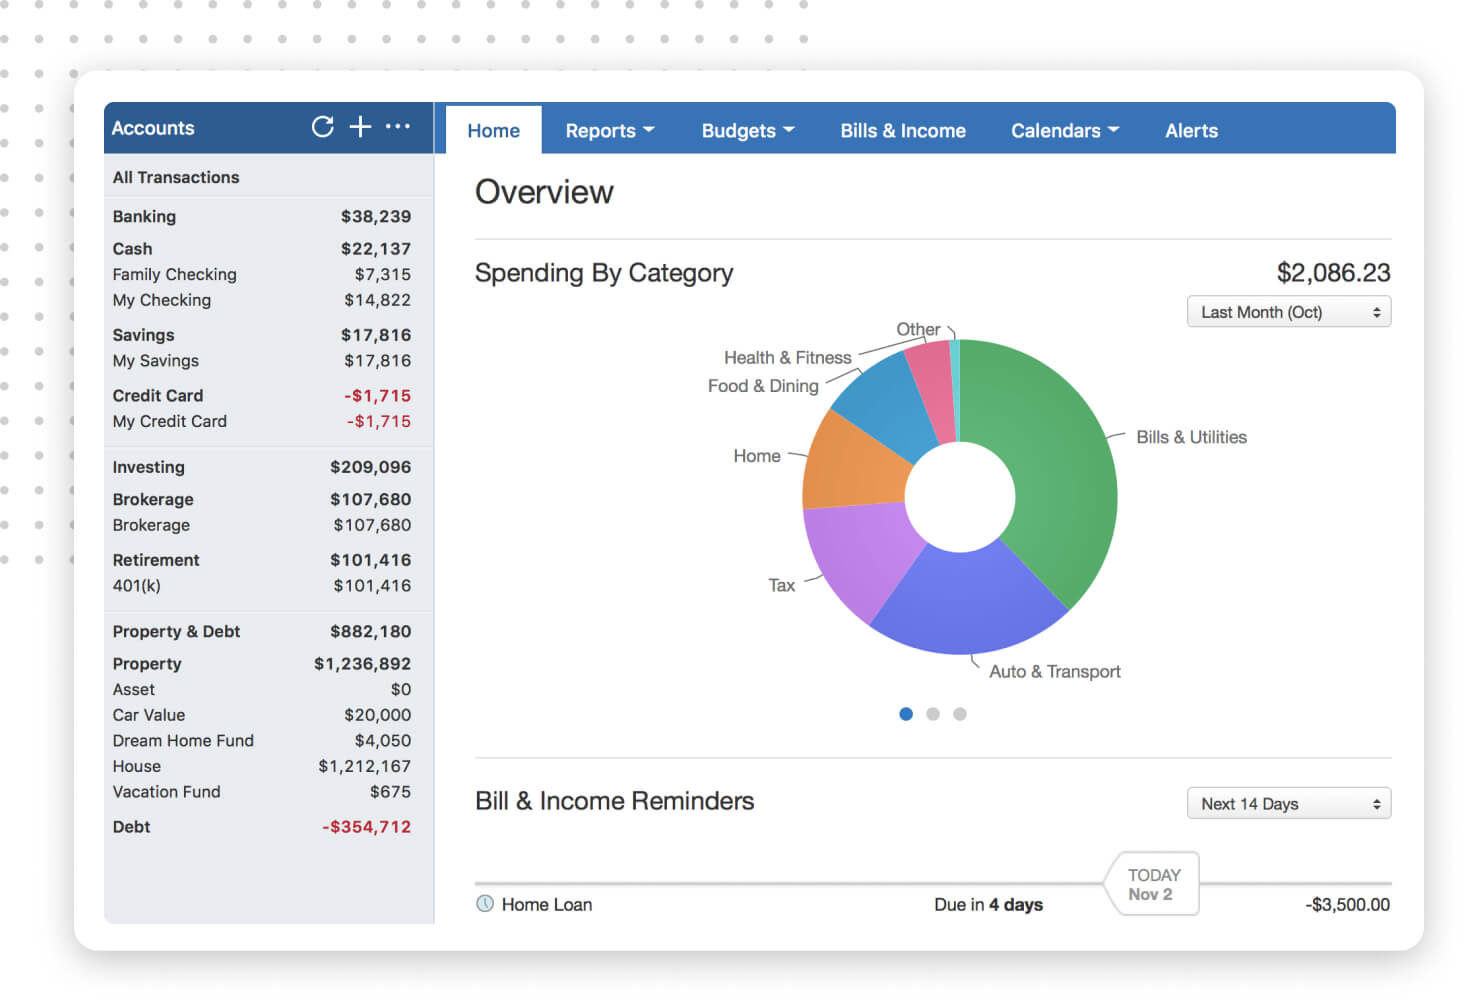 What is Quicken 2016? Quicken 2016 is a personal finance management tool that helps you organize your finances and keep track of your expenses.
Is Quicken 2016 compatible with Windows 7? Yes, Quicken 2016 is fully compatible with Windows 7.